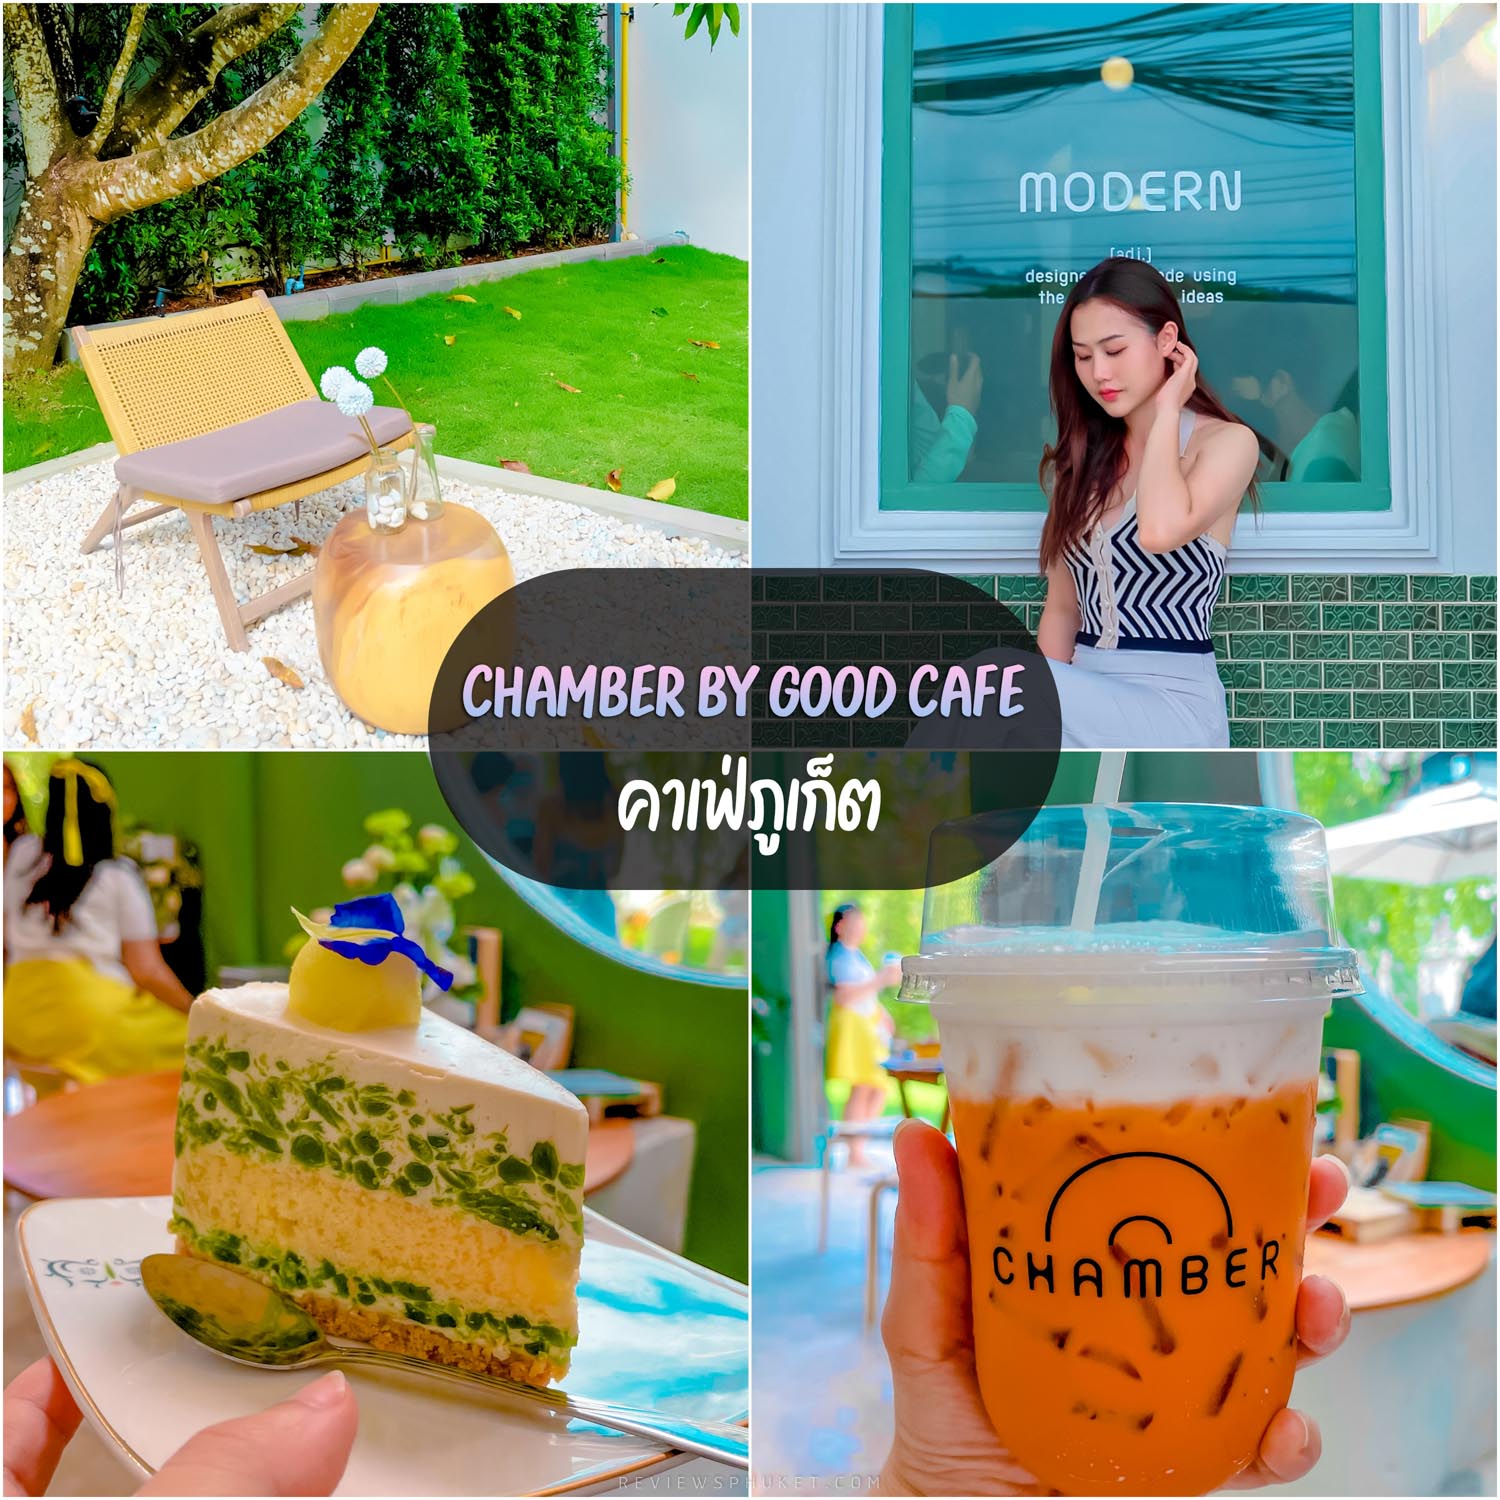 Chamber by good cafe, Phuket cafe, nice to sit and relax. With soft music Including delicious bakery items.